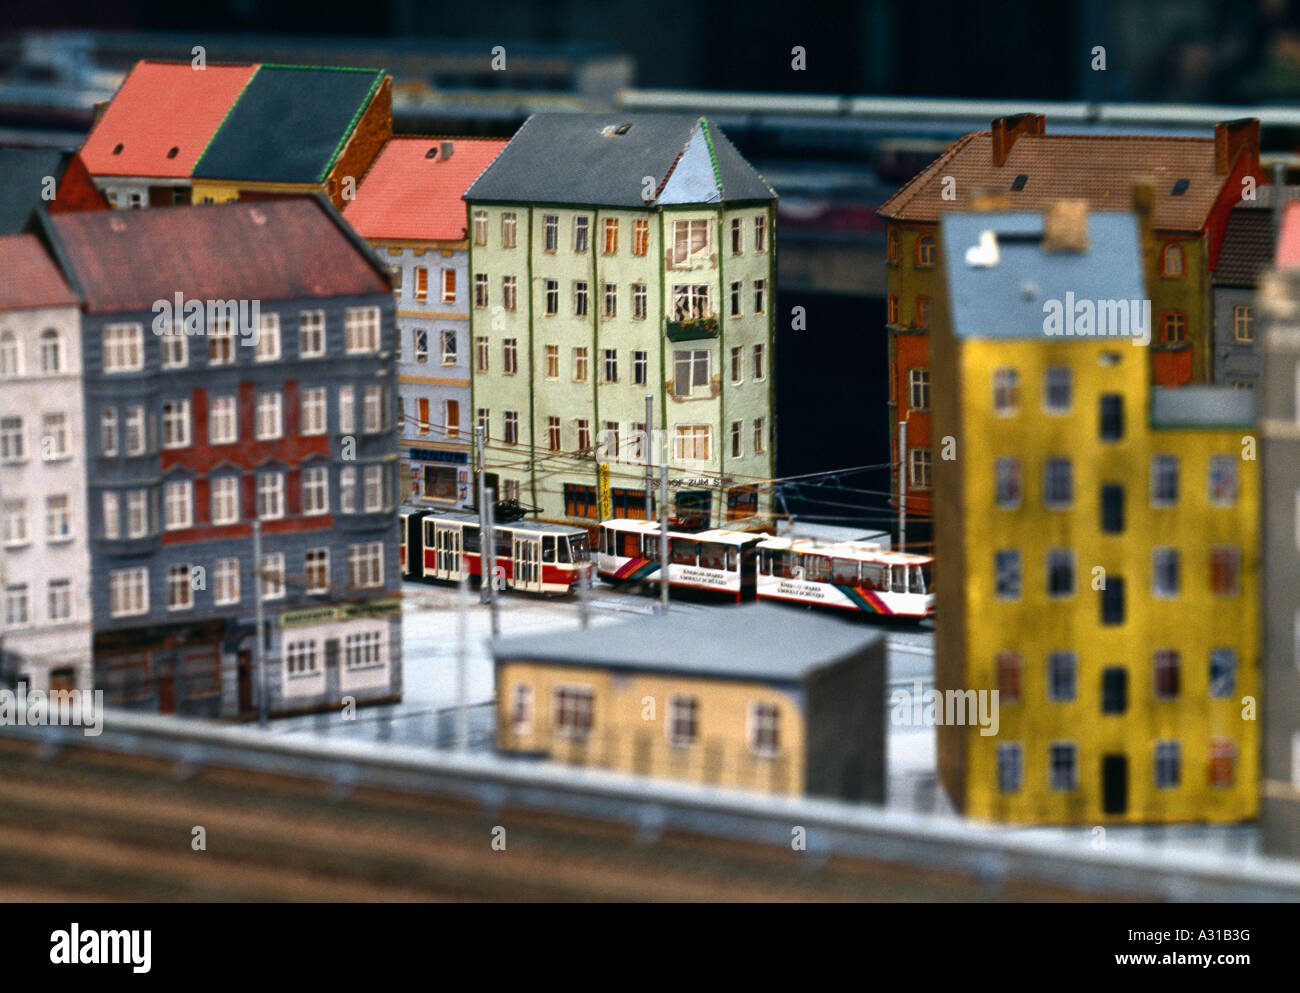 Model of city intersection with cable cars and apartment buildings Stock Photo